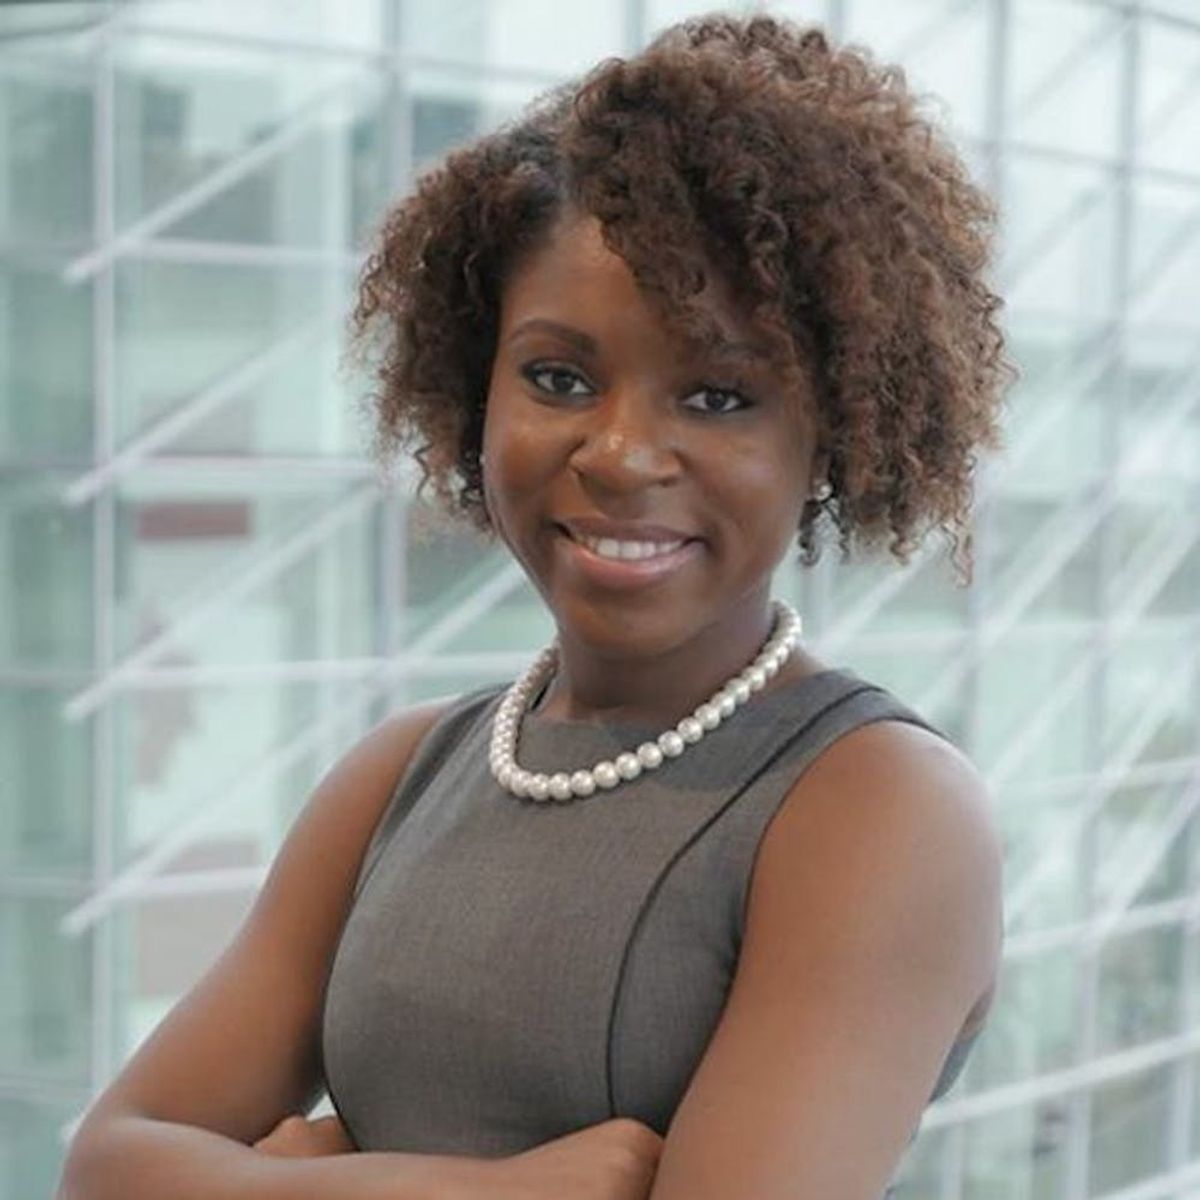 Whoa: A 22-Year-Old Woman Is Running for Mayor of Detroit